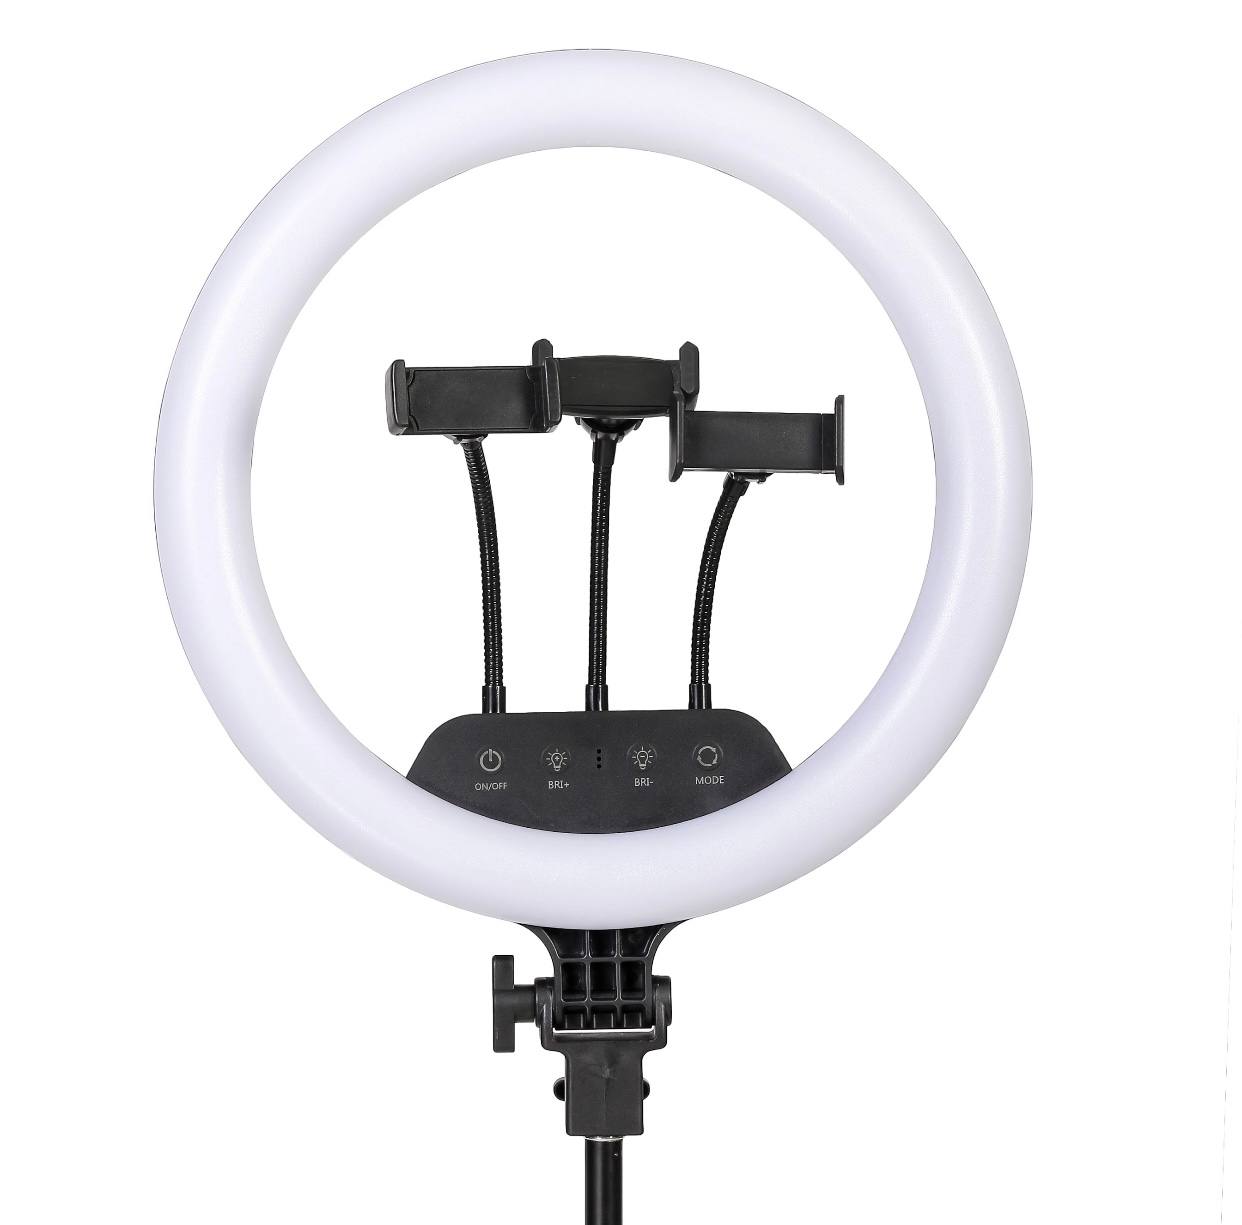 Buy Webilla 10 Inches Selfie Ring Light with Tripod Stand for Camera |  Smartphone | YouTube | Tiktok | Video Shouting | Makeup | Studio Light with  Phone Holder Online at Low Prices in India - Amazon.in